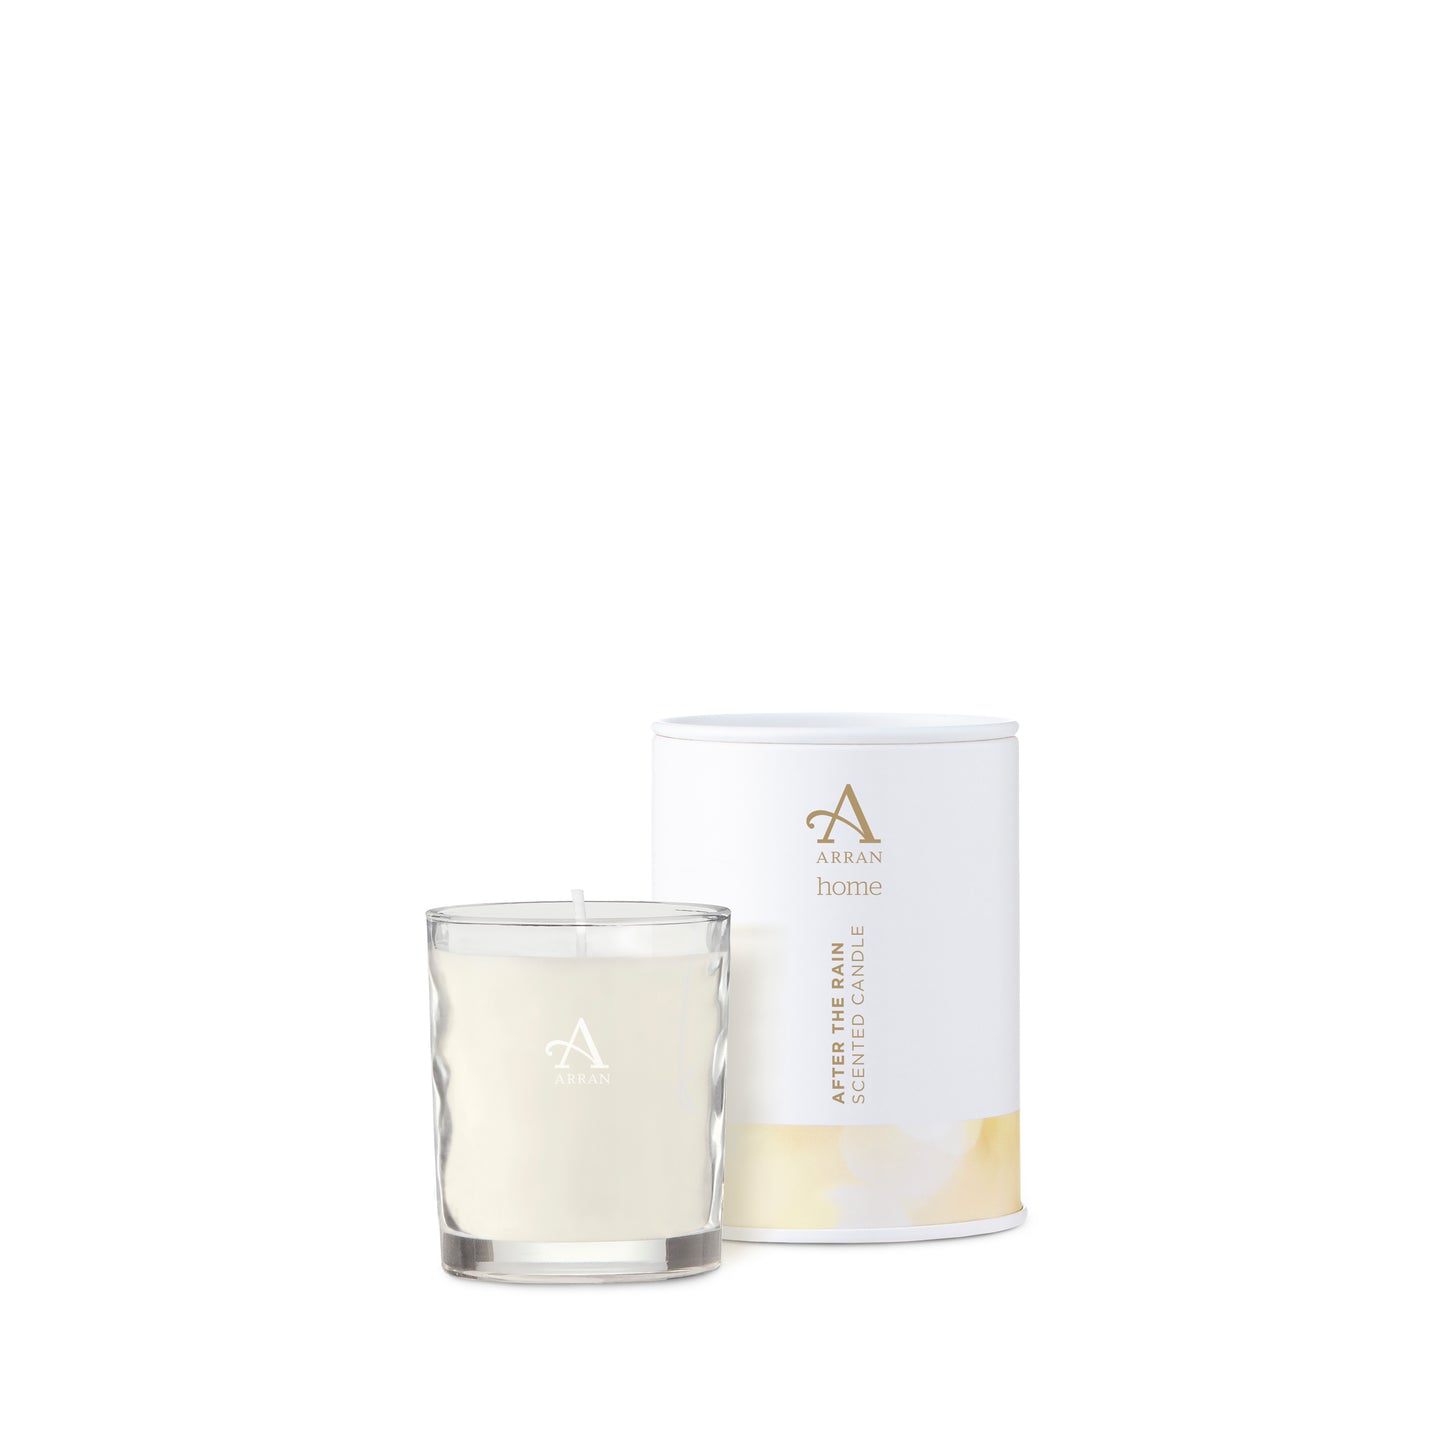 After The Rain Scented Candle 35cl | 【雨後系列】家居蠟燭 35厘升